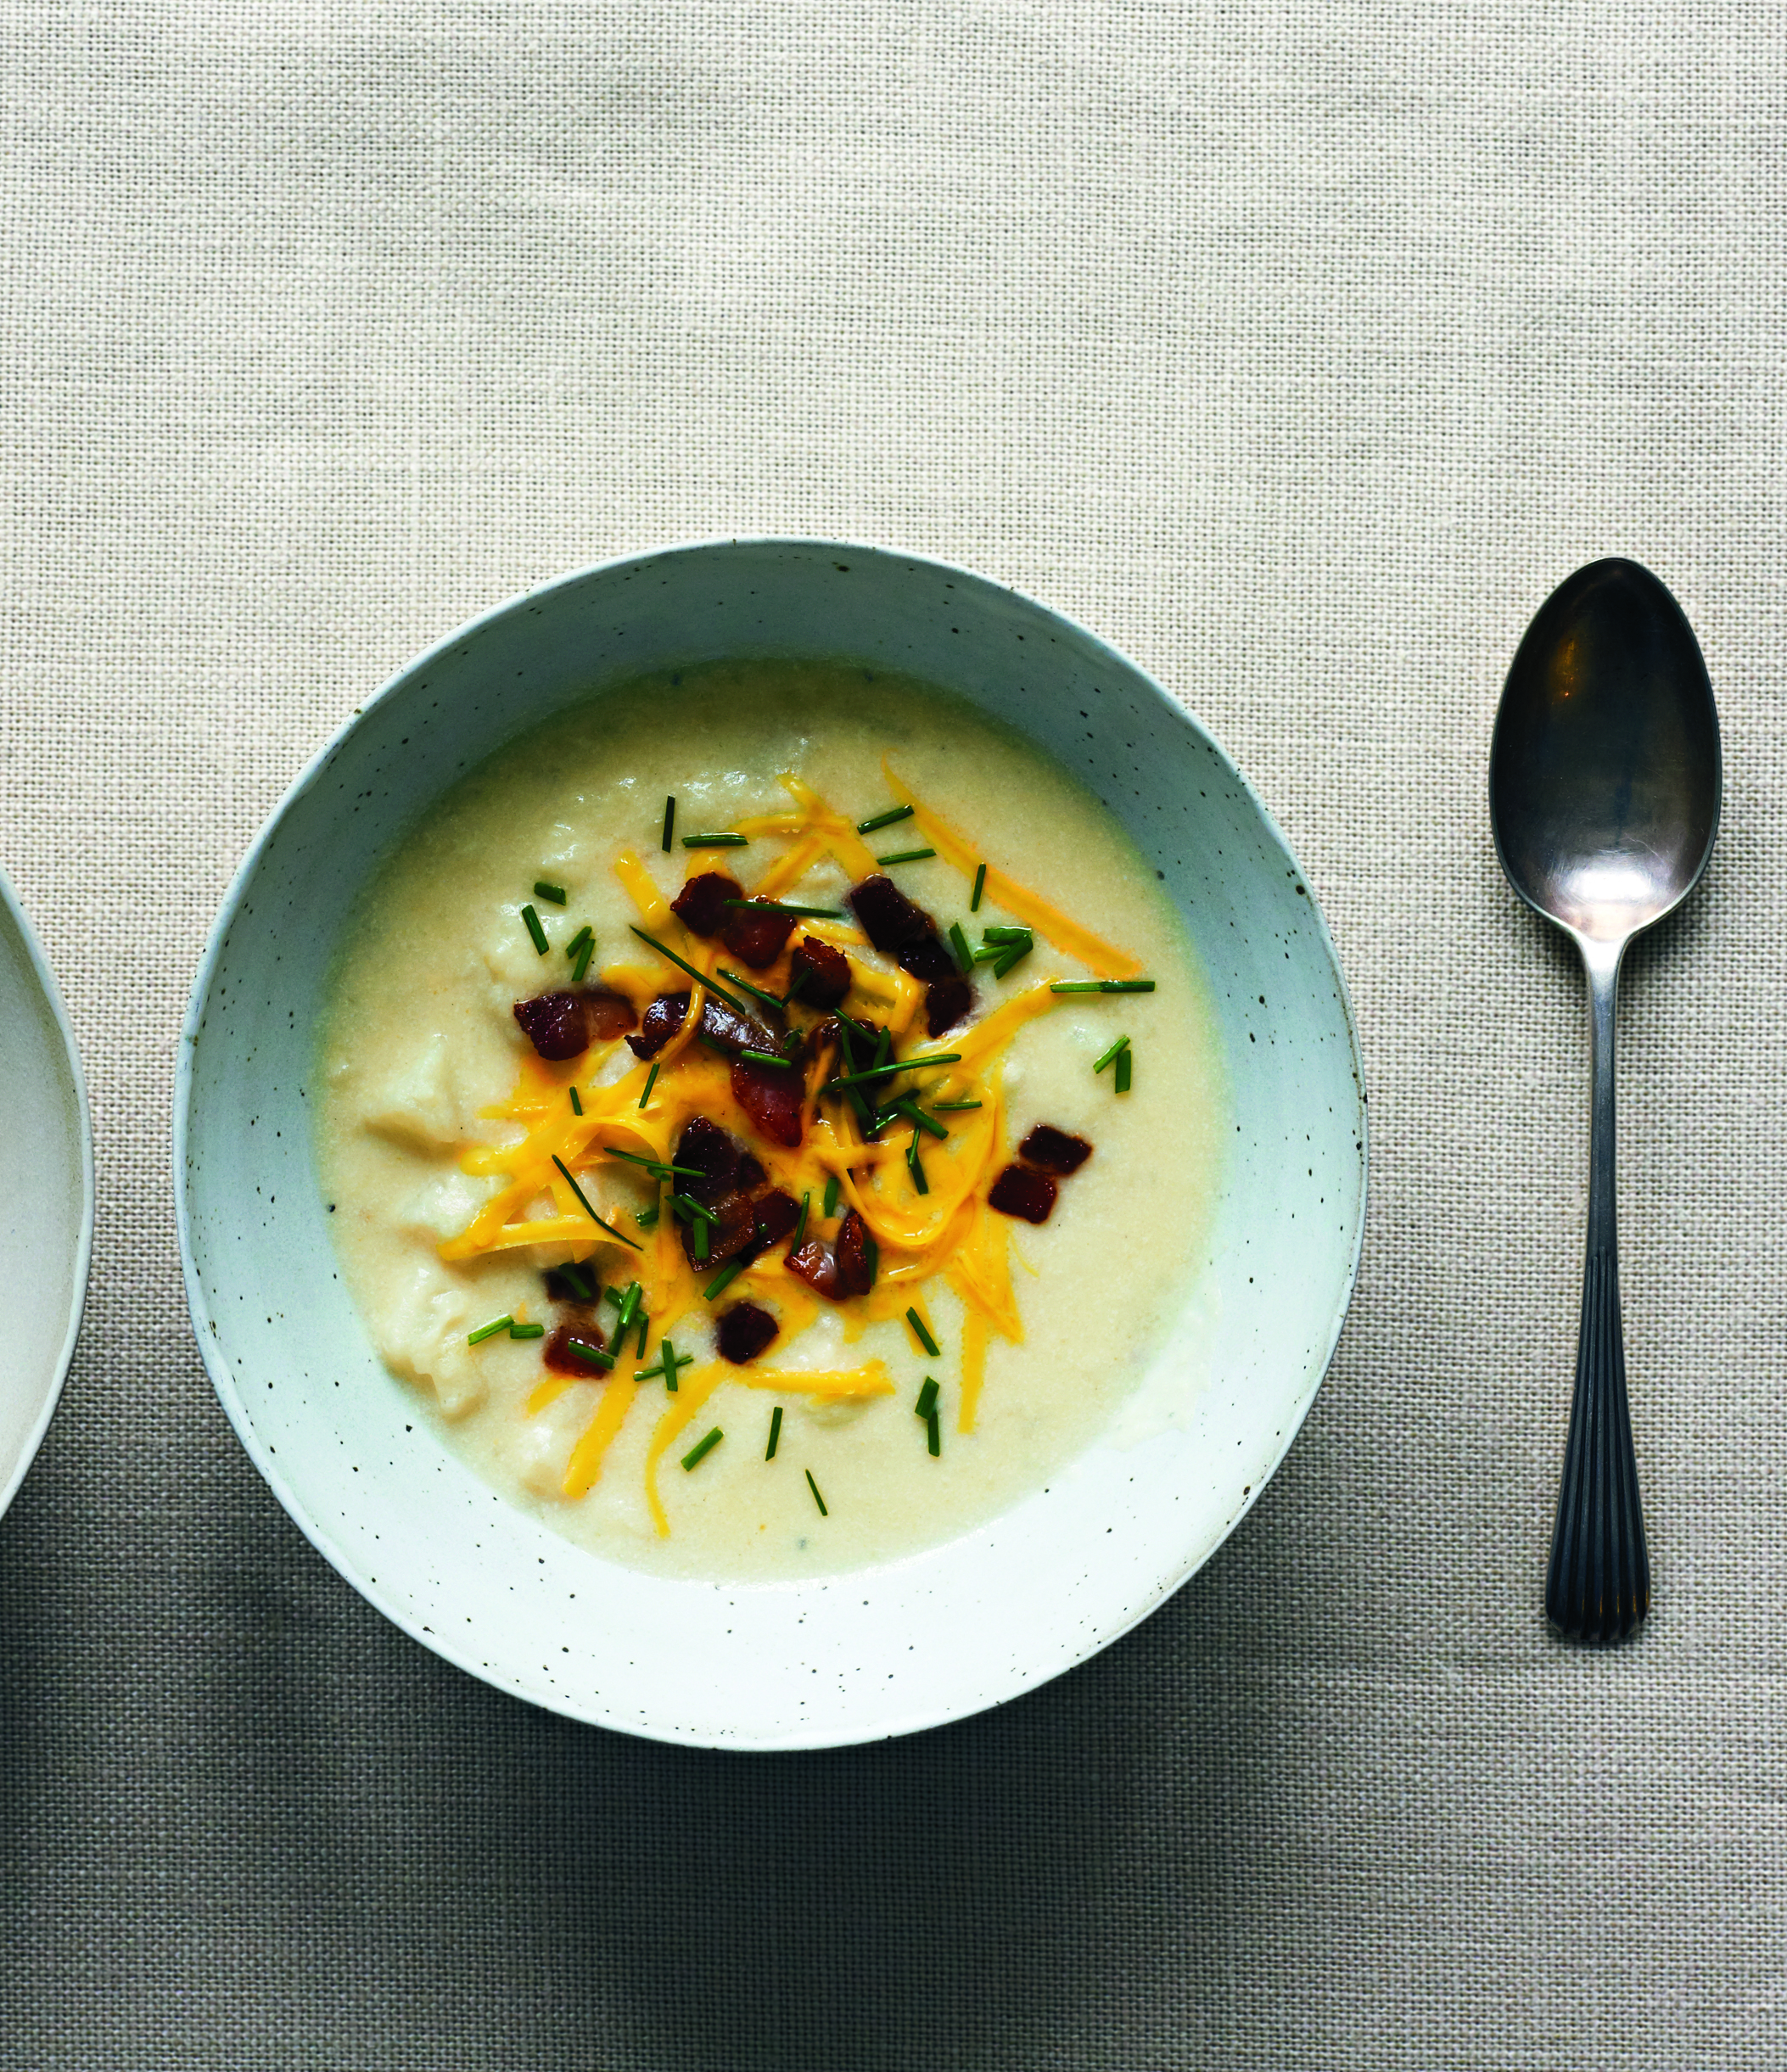 5. Loaded Bacon-Potato Soup With Cheddar and Chives